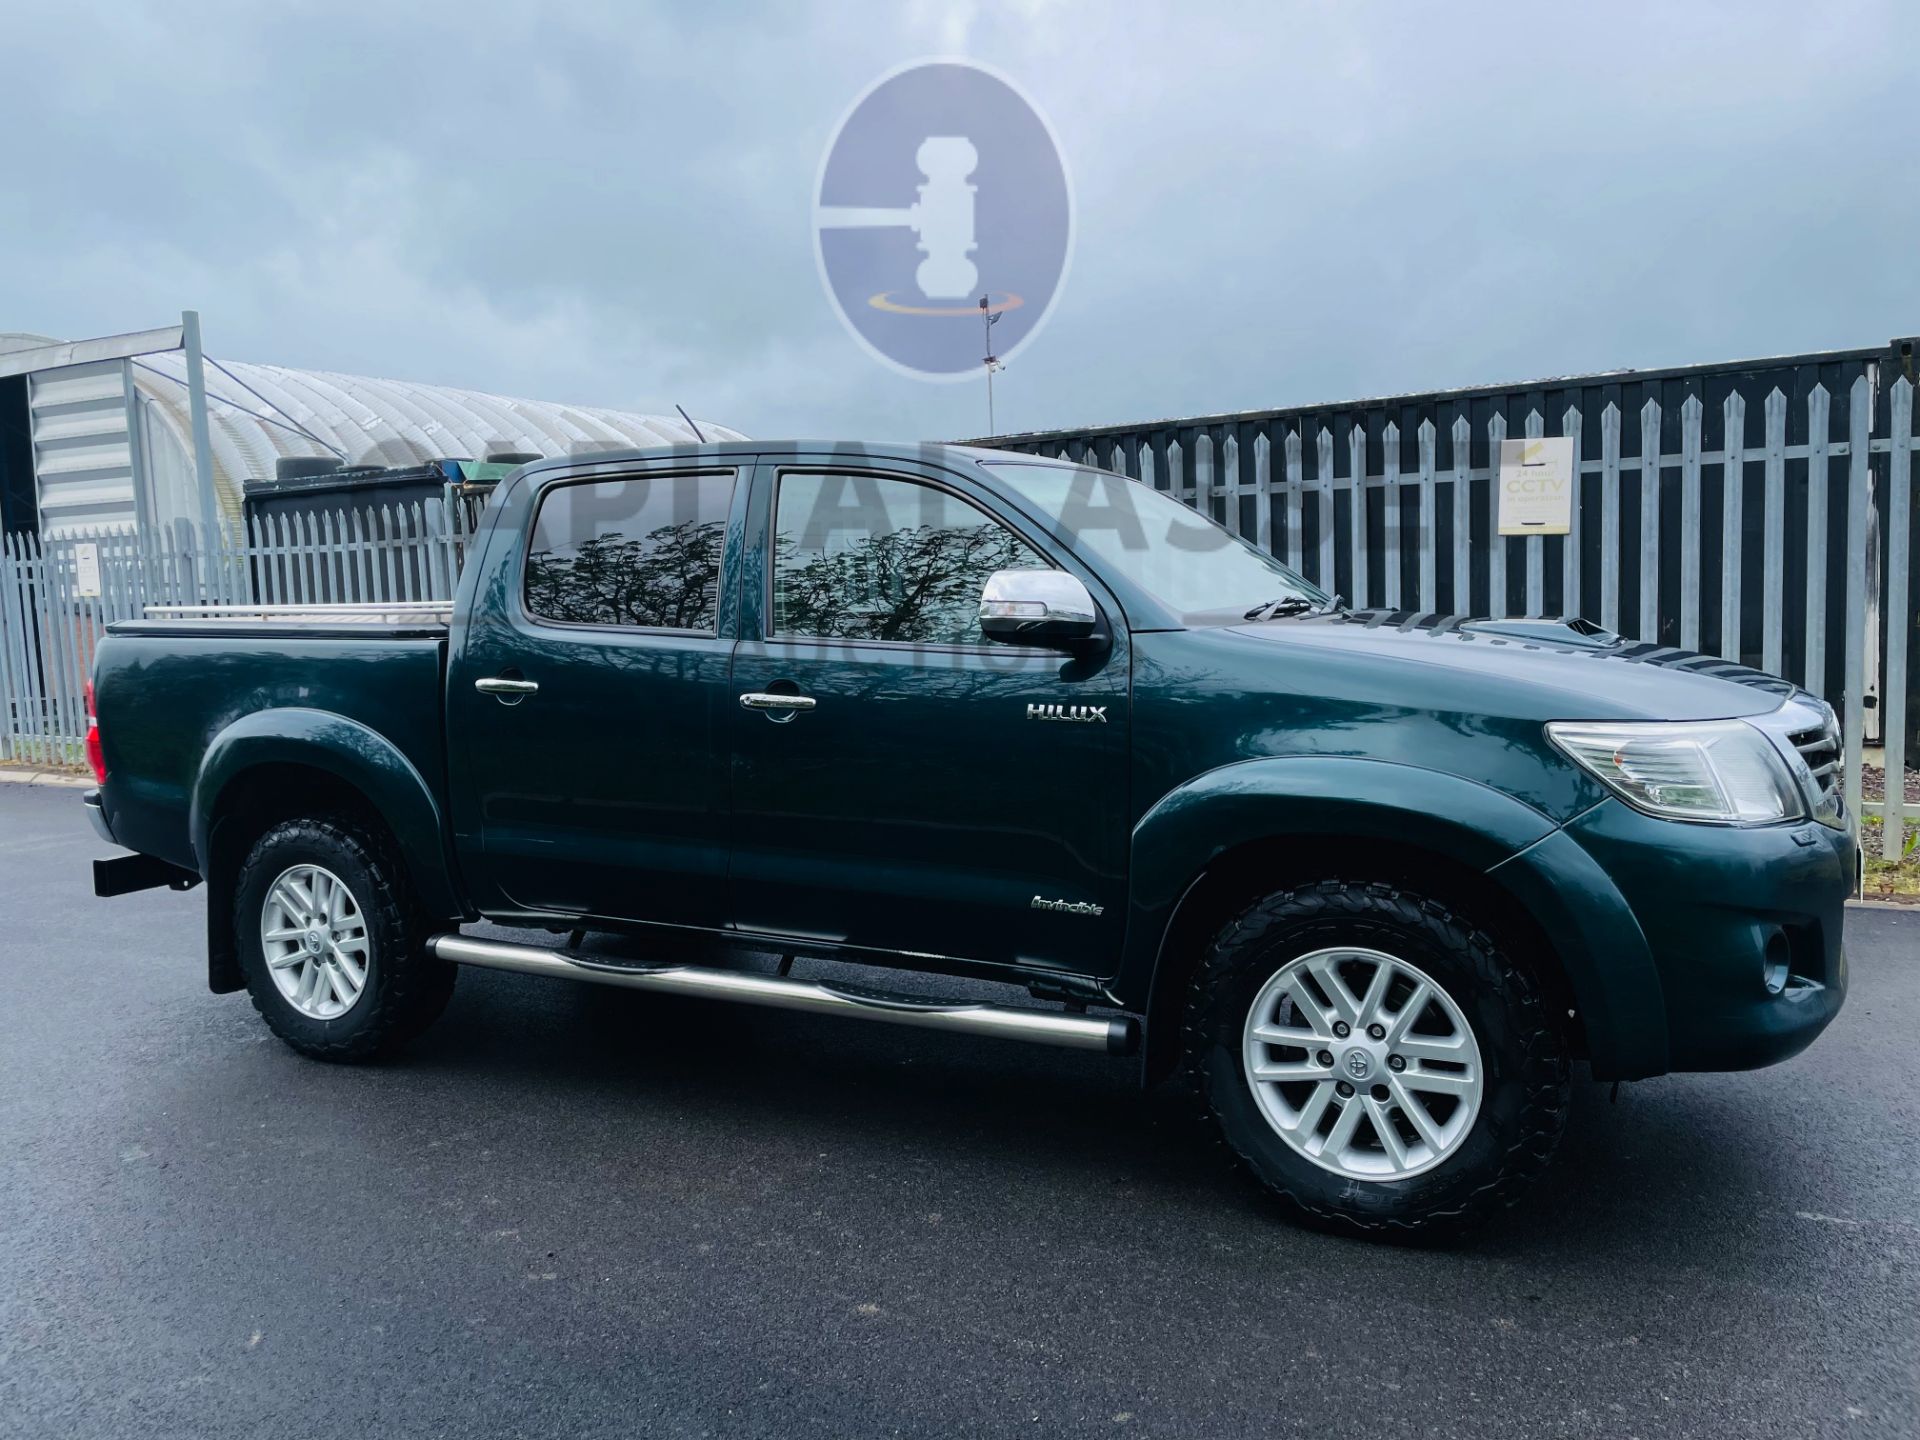 ON SALE TOYOTA HILUX 3.0 D-4D "INVINCIBLE" AUTO (2015 MODEL) TOP SPEC - LEATHER - REAR CAMERA - - Image 7 of 22